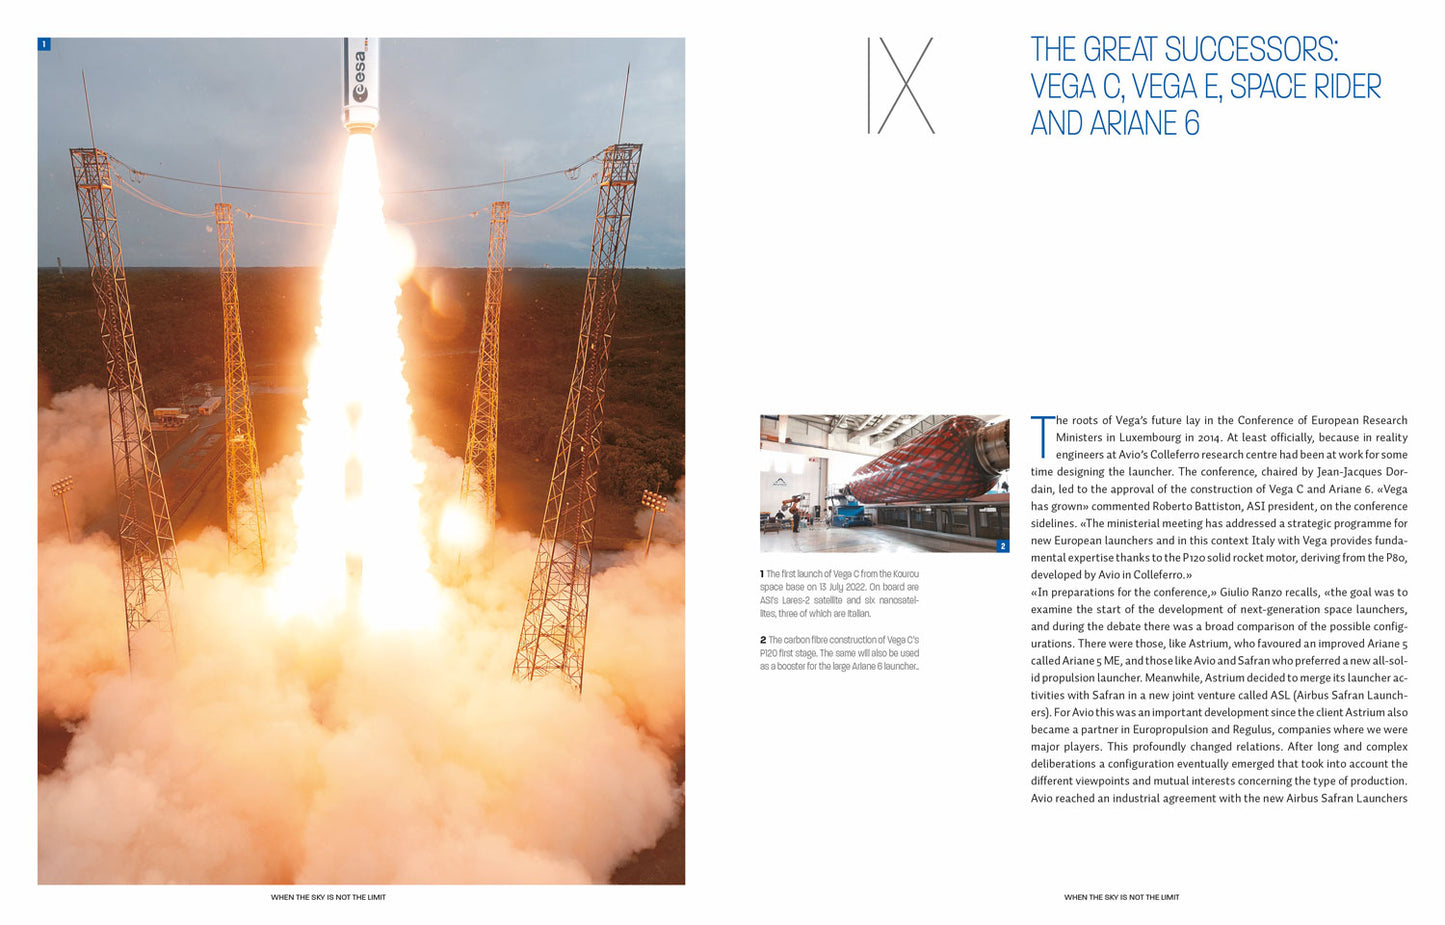 When the sky is not the limit::The story of how a company set out to conquer space